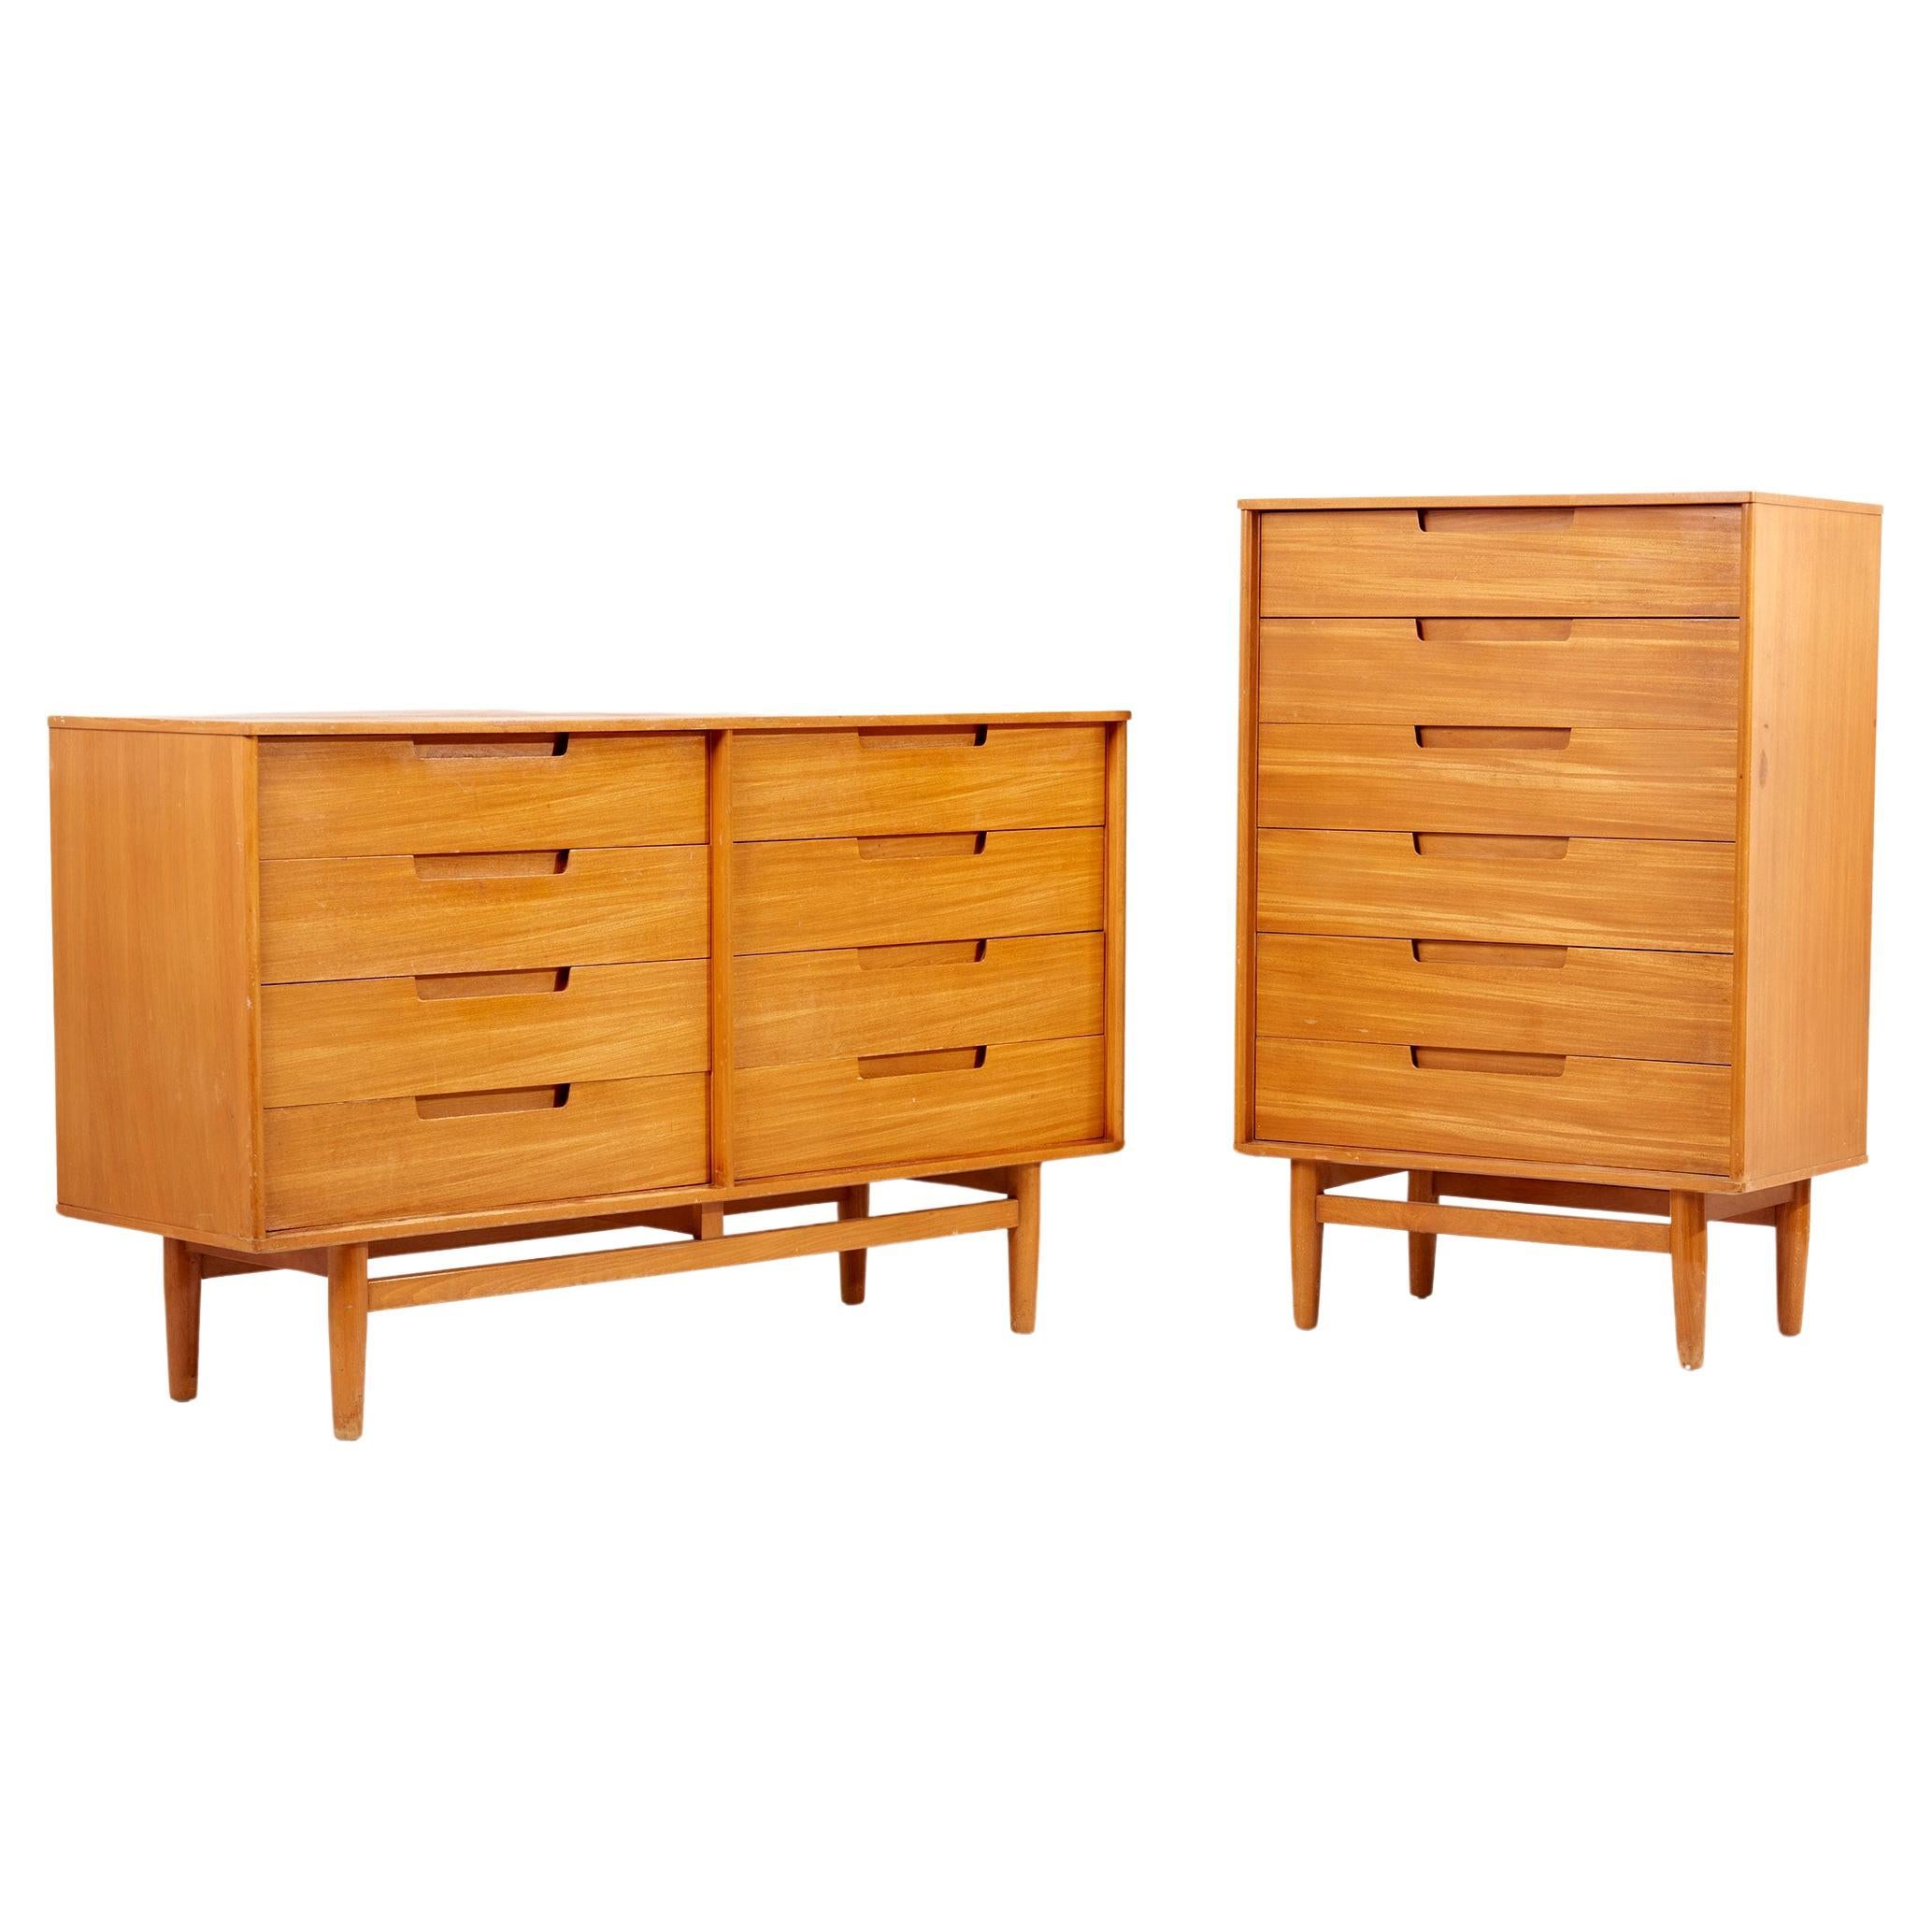 Matched pair of Milo Baughman Dressers for Drexel USA - 1950s For Sale